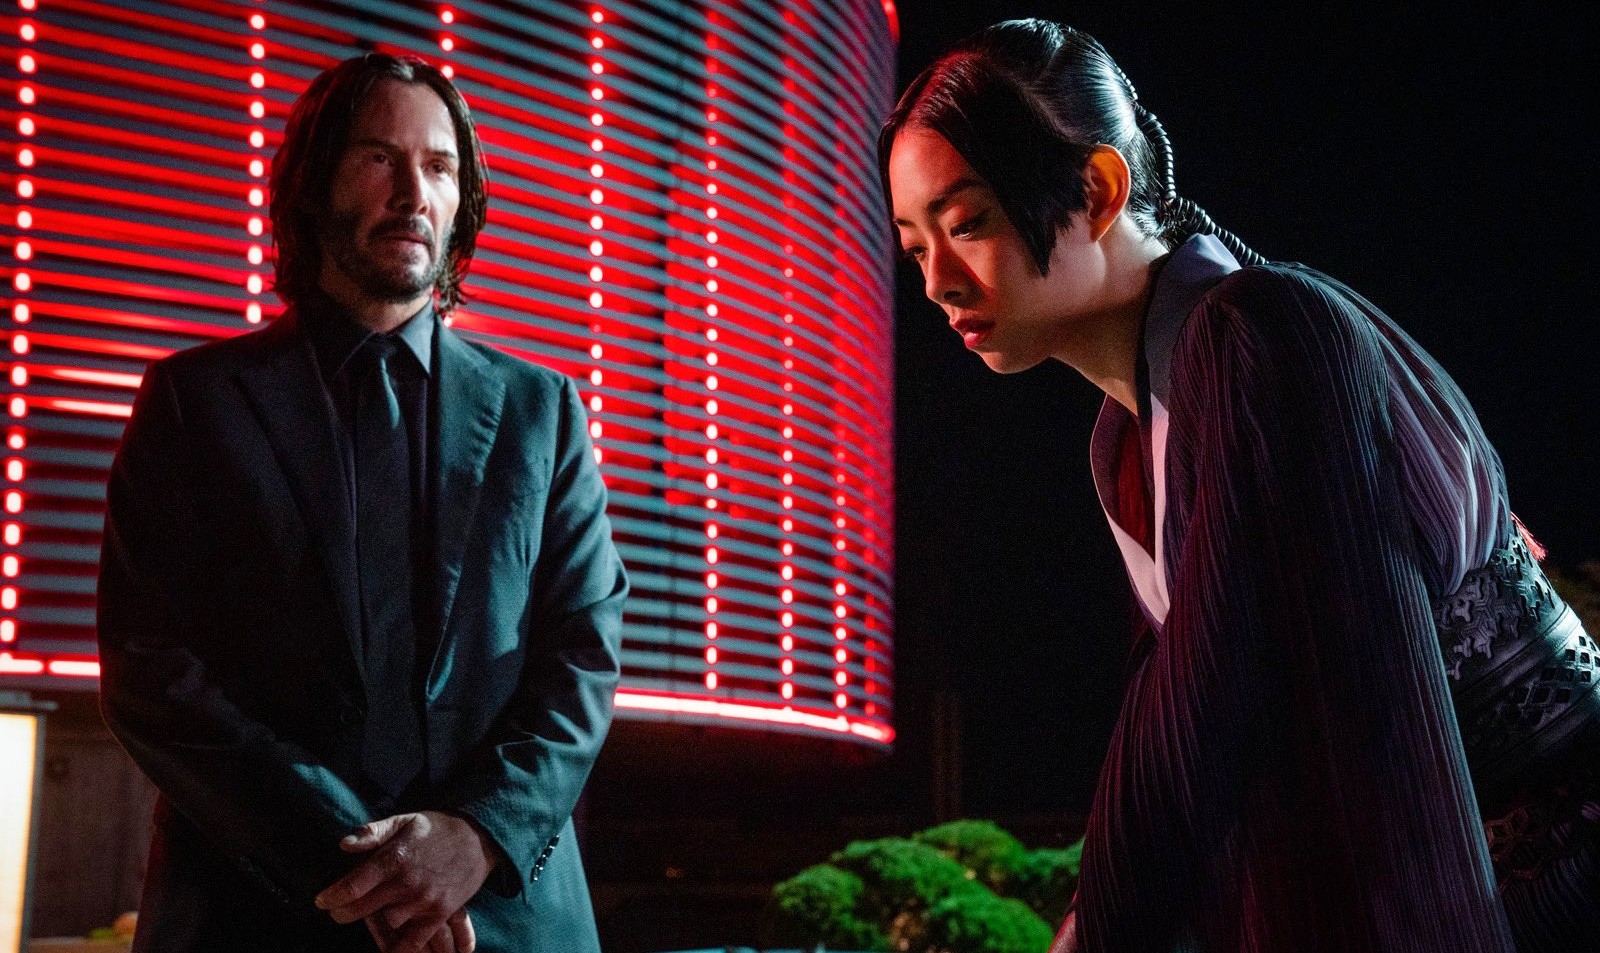 Everything We Know So Far About a Possible John Wick: Chapter 5